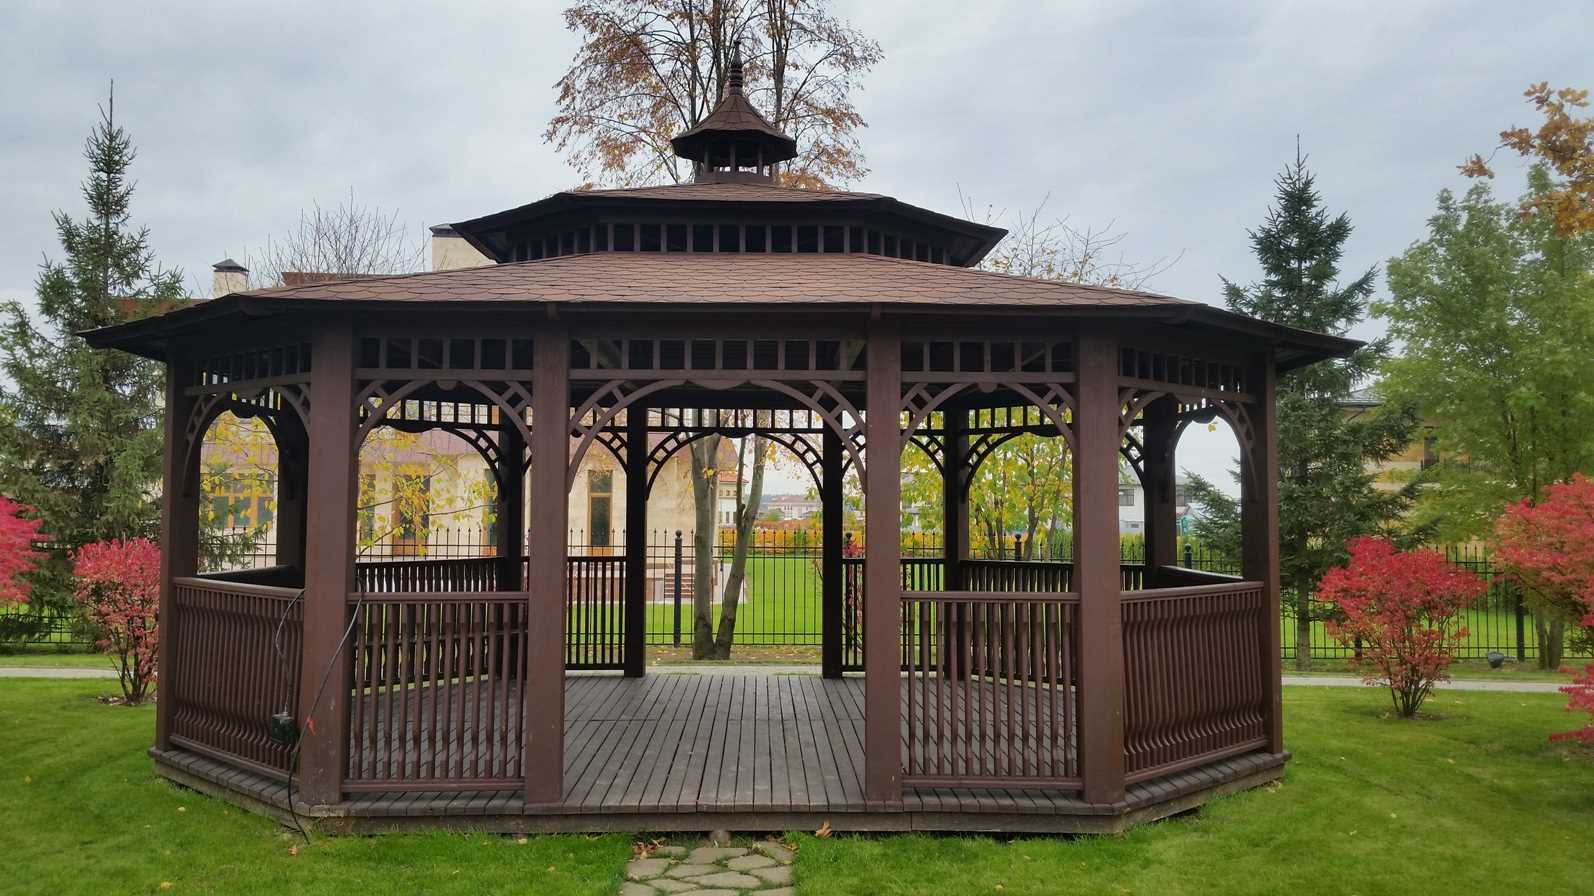 version of the beautiful style of the gazebo in the yard